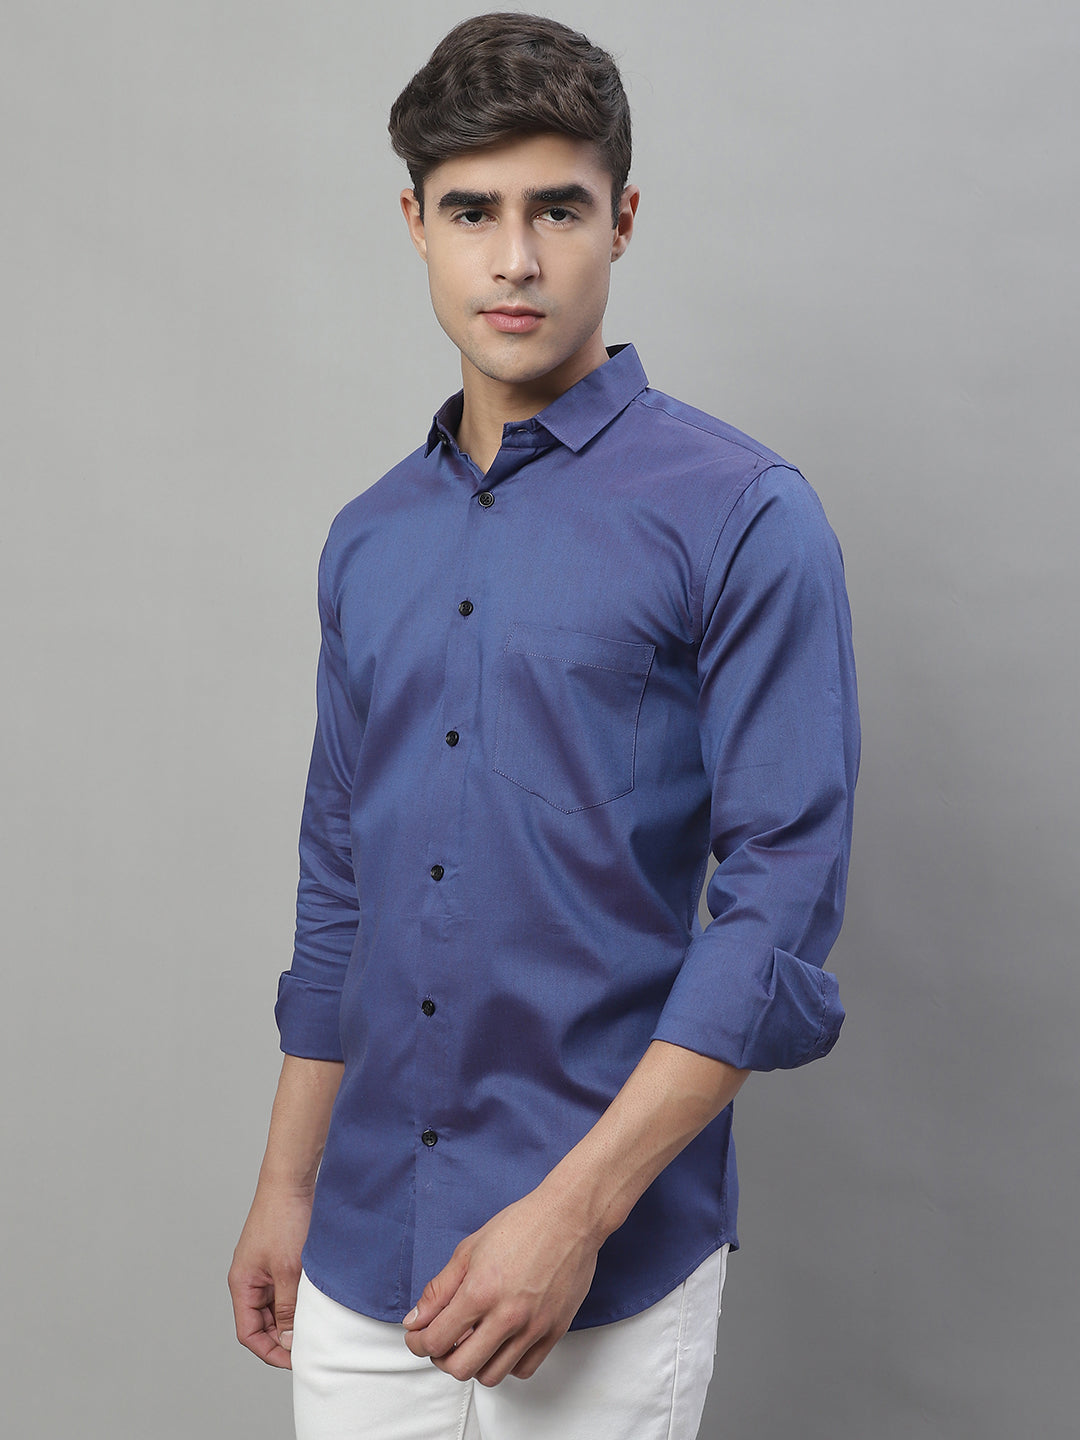 Unique and Classy Casual Shirt - Blue